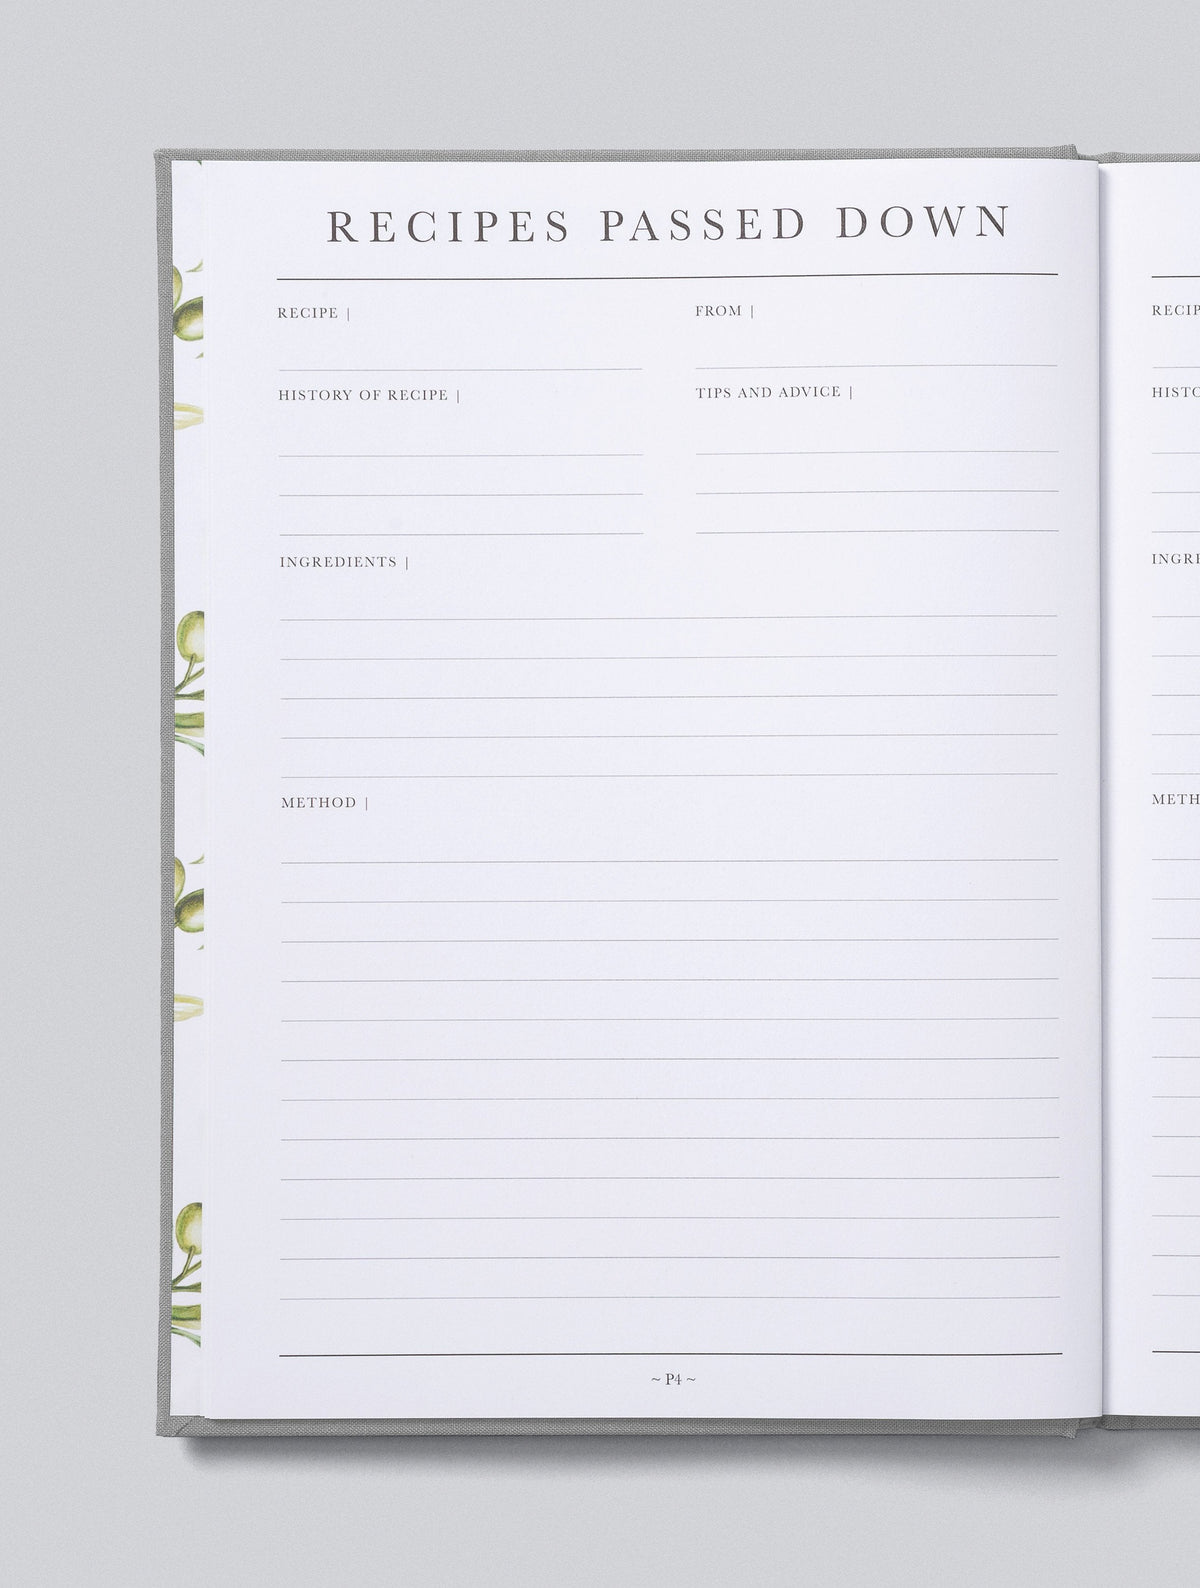 Our Family Recipes-Blank Keepsake Recipe Journal/Book New